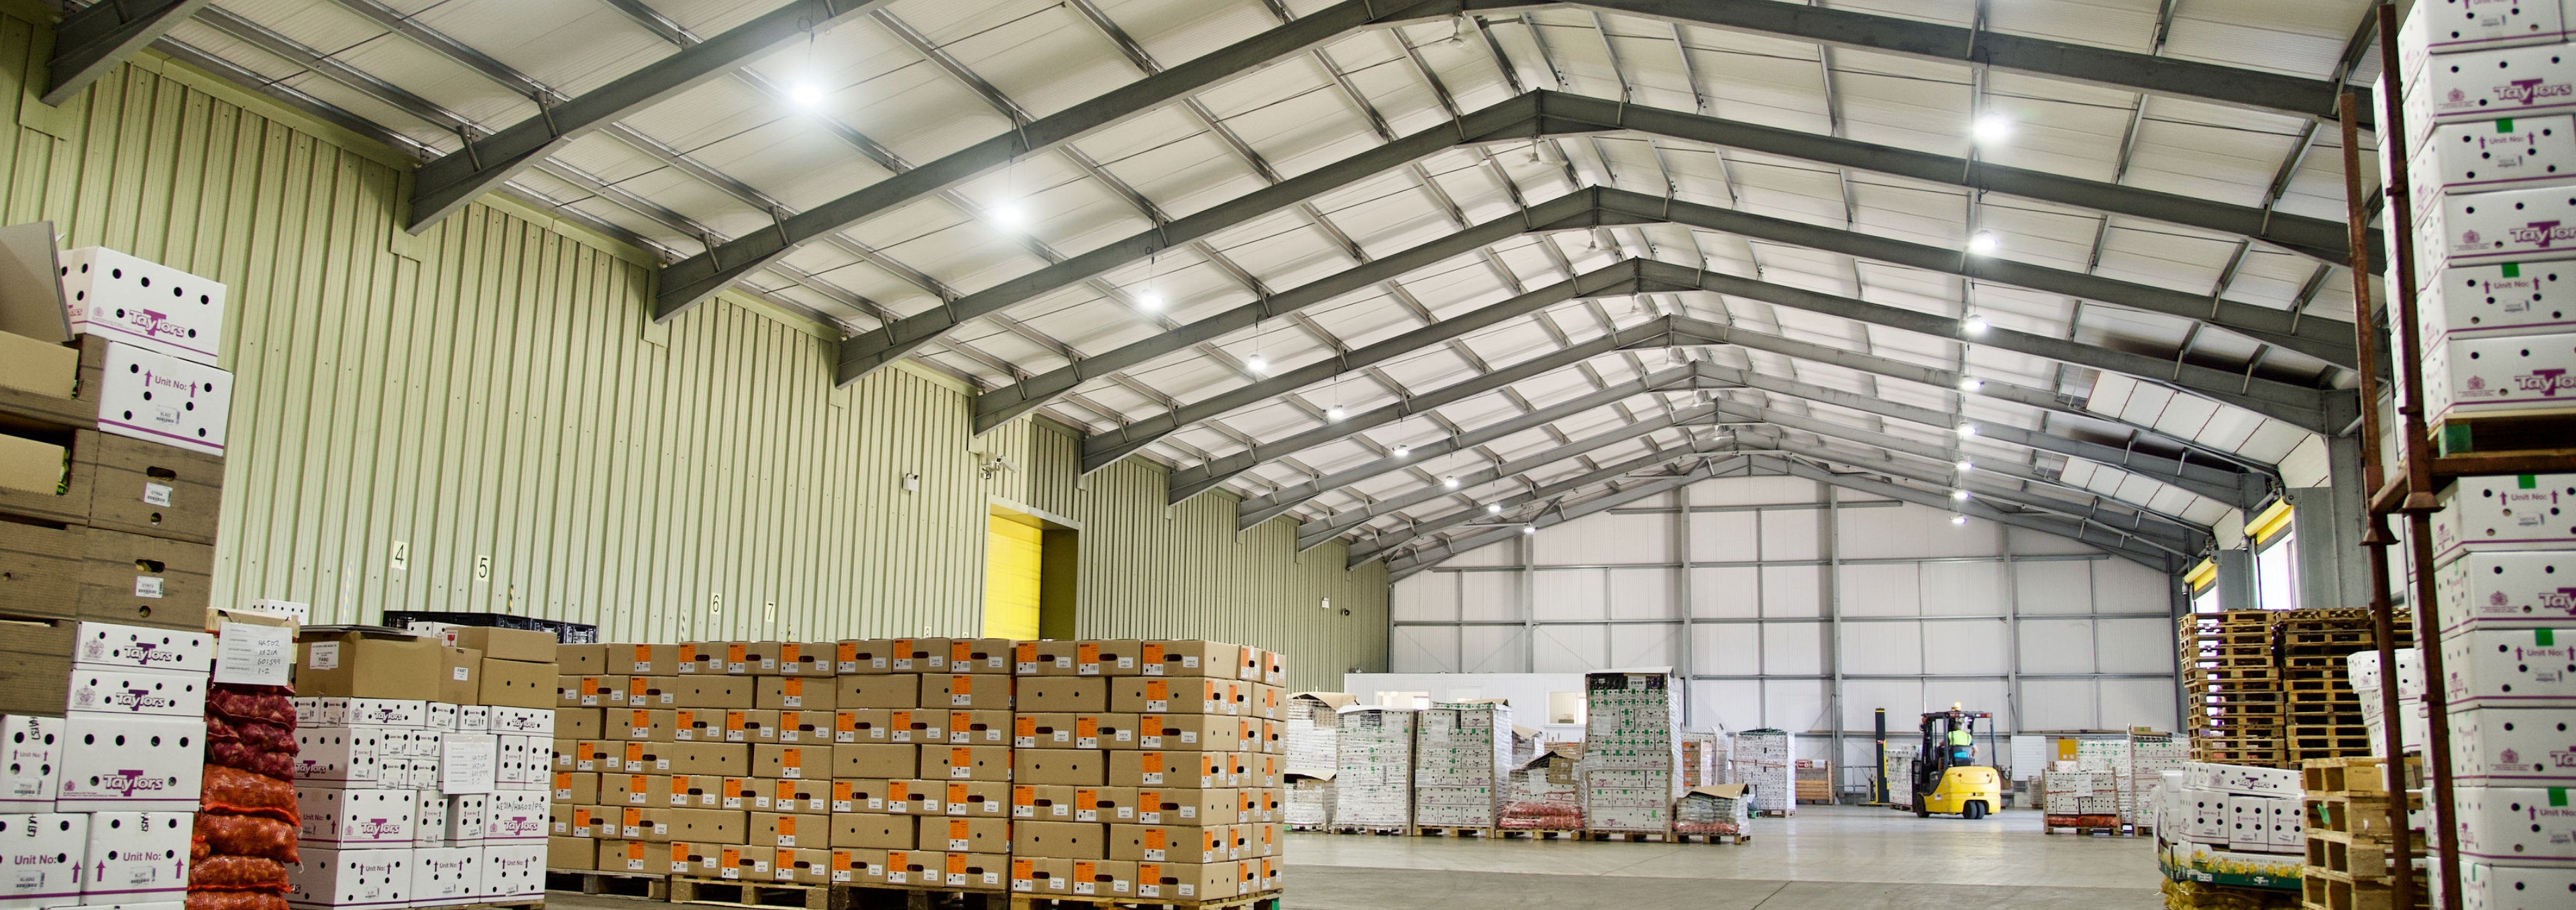 LED Highbays in a warehouse